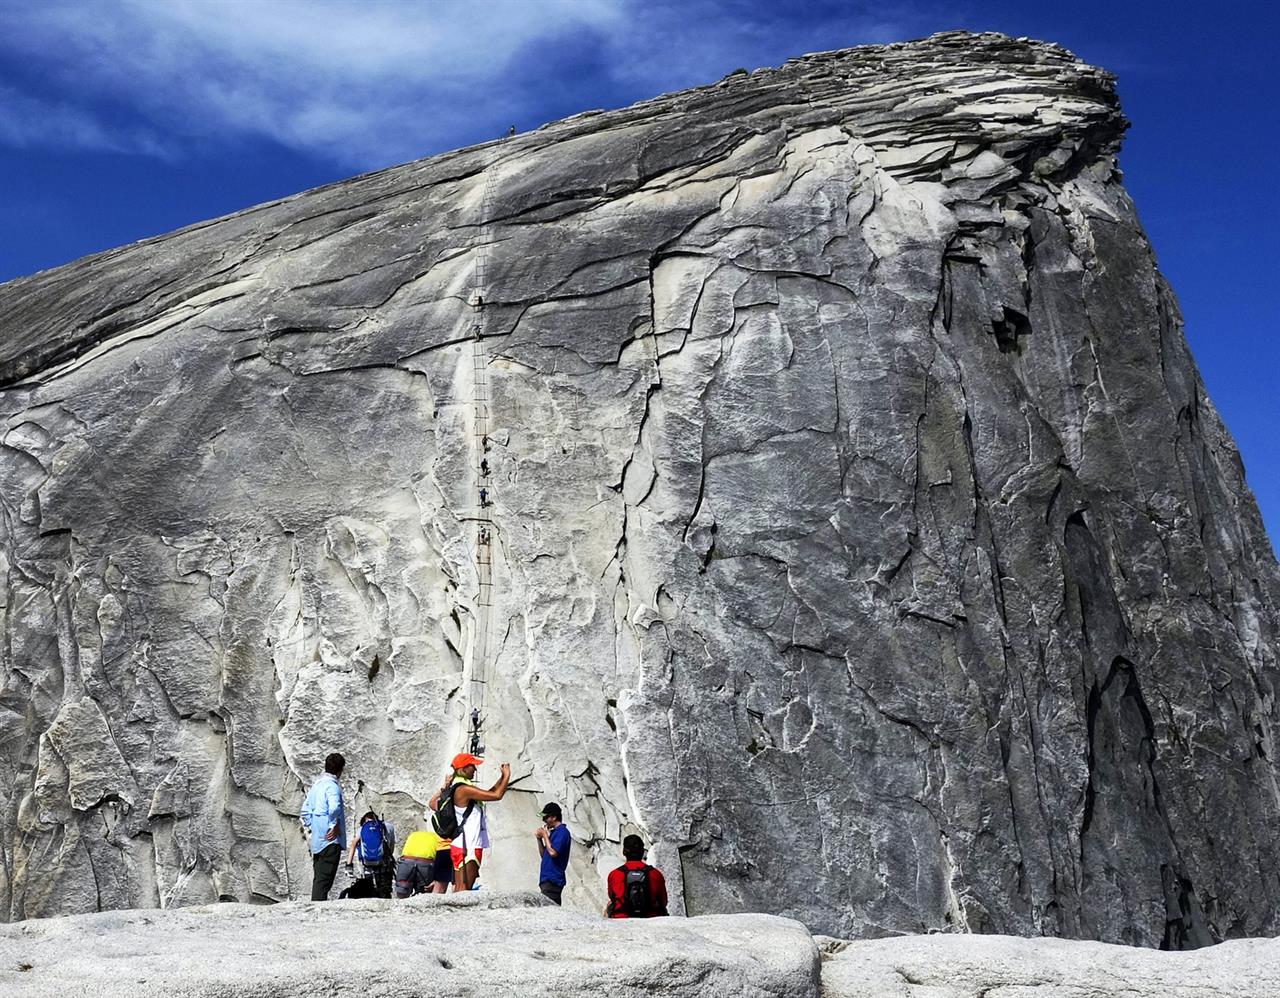 Hiker dies after falling from Yosemite's Half Dome trail Sacramento, CA